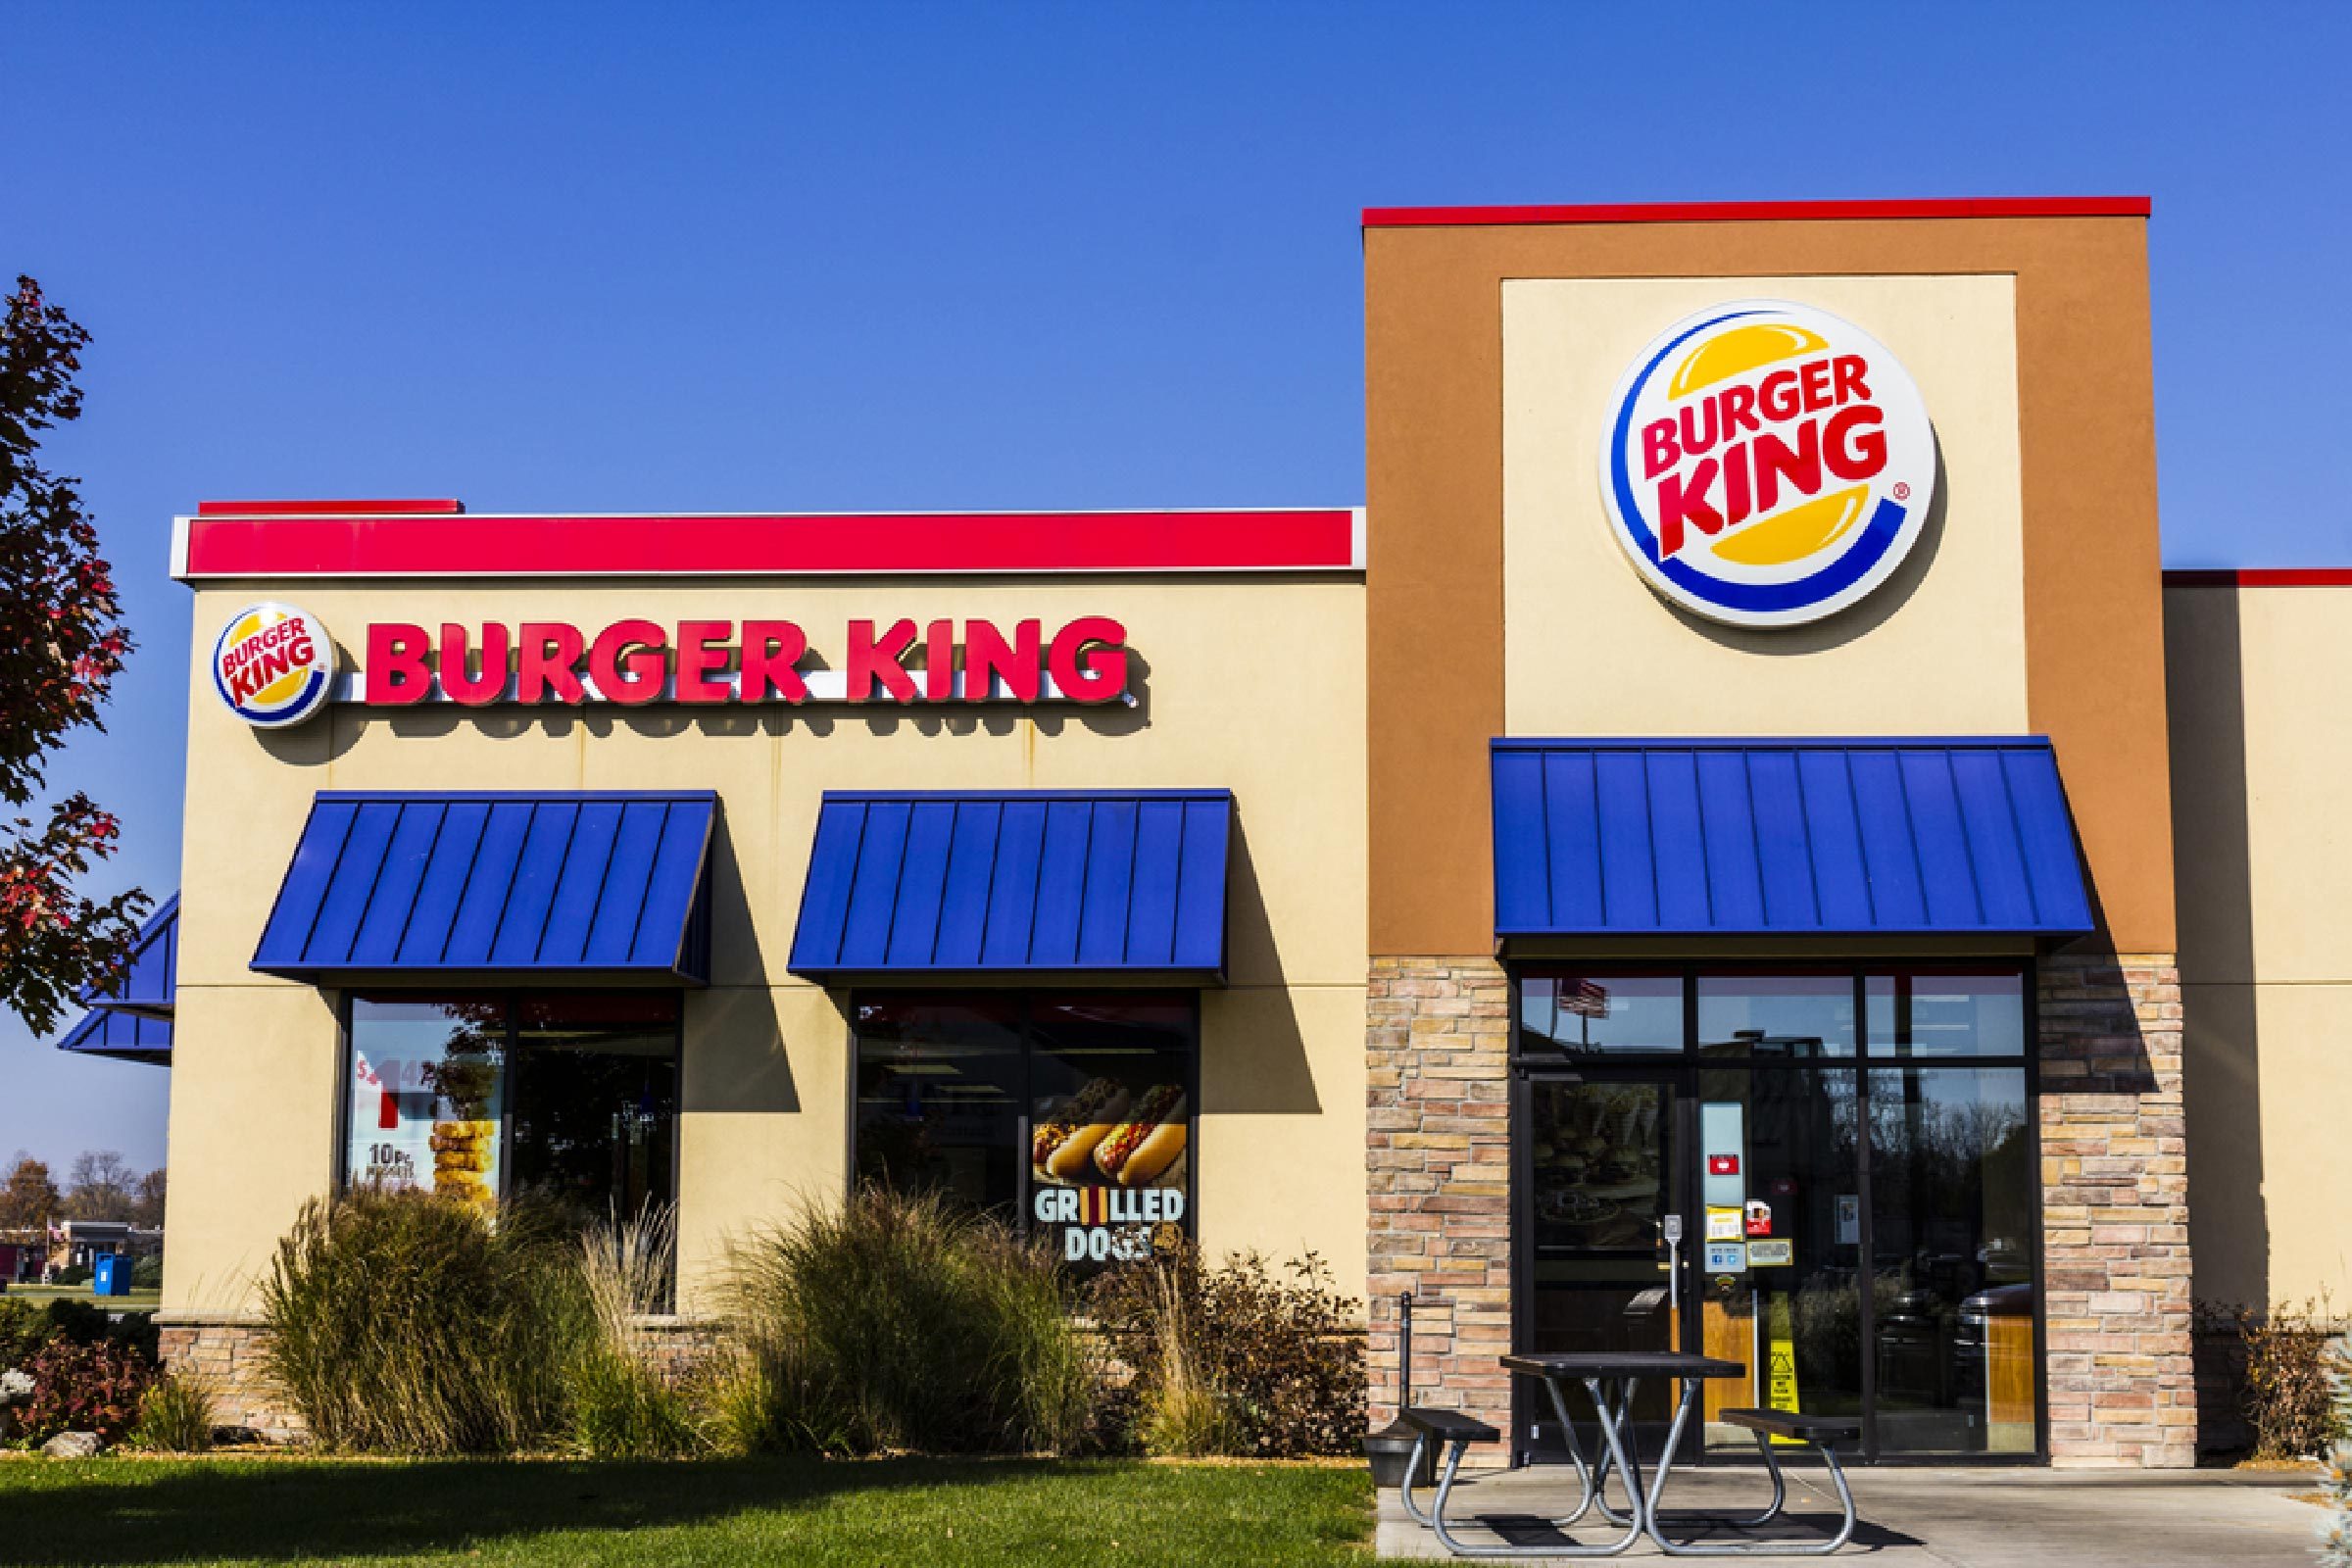 The Most Convenient Fast-Food Restaurants, According to Customers